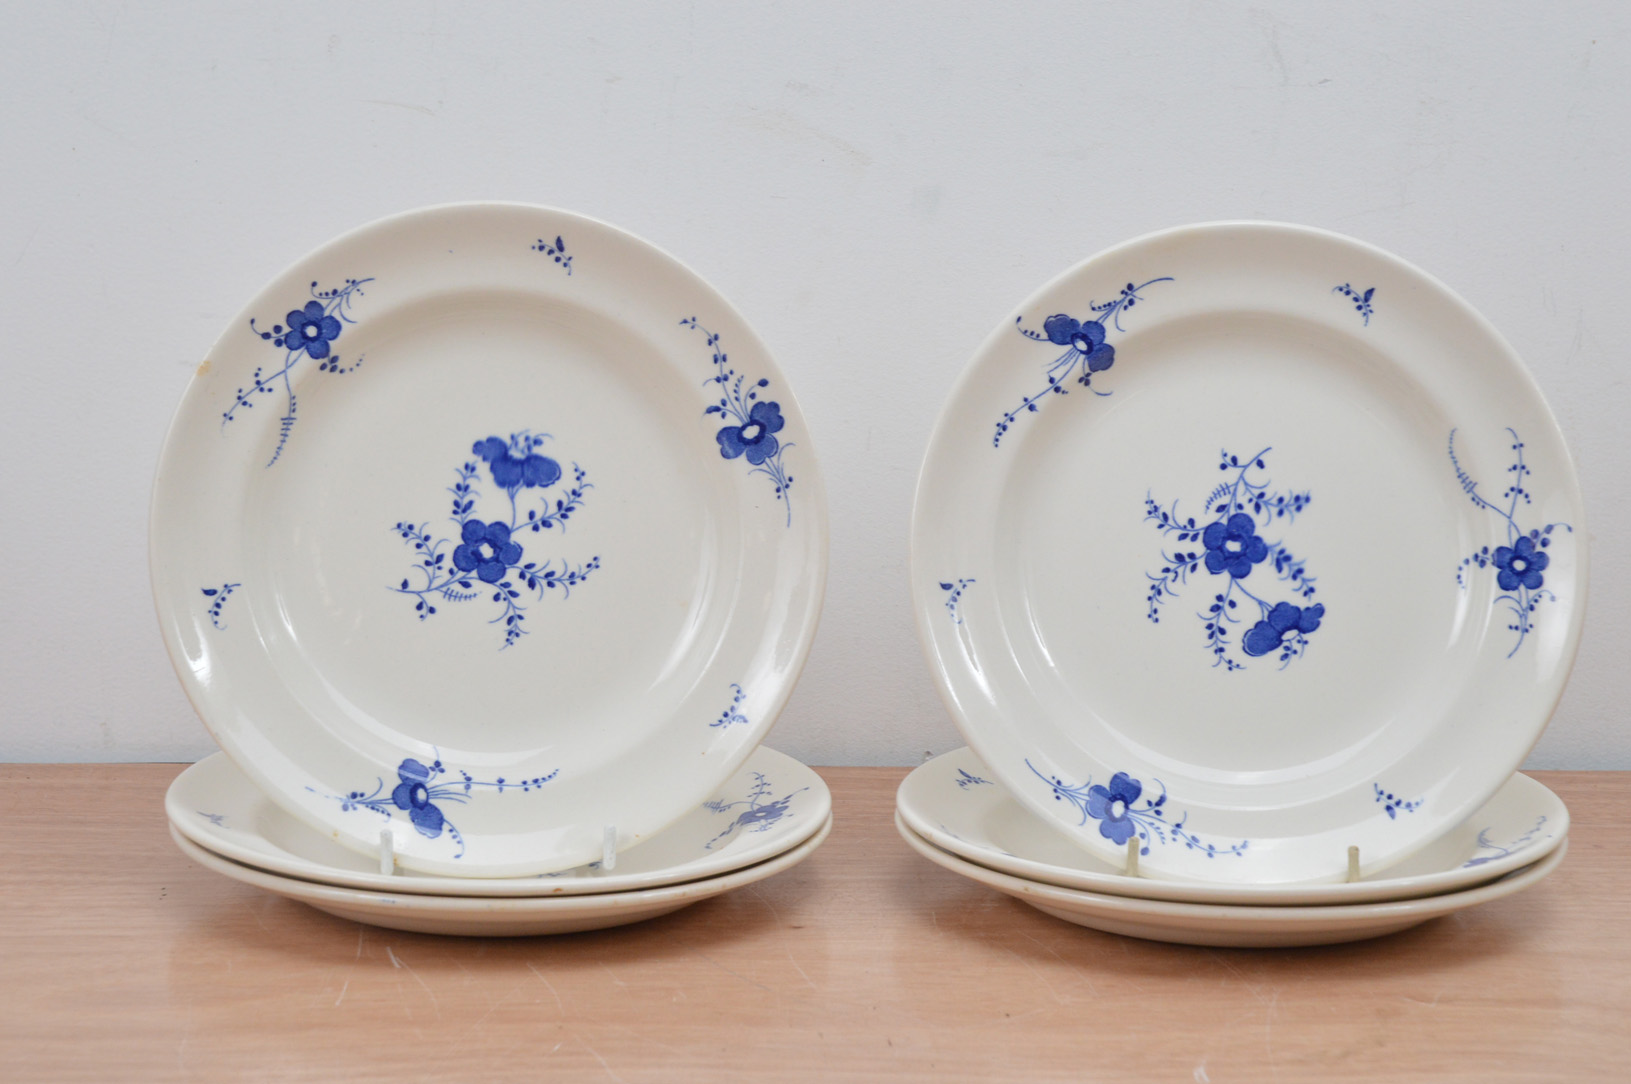 Six 19th century Copeland Spode plates, with a transfer printed floral design, impressed and printed